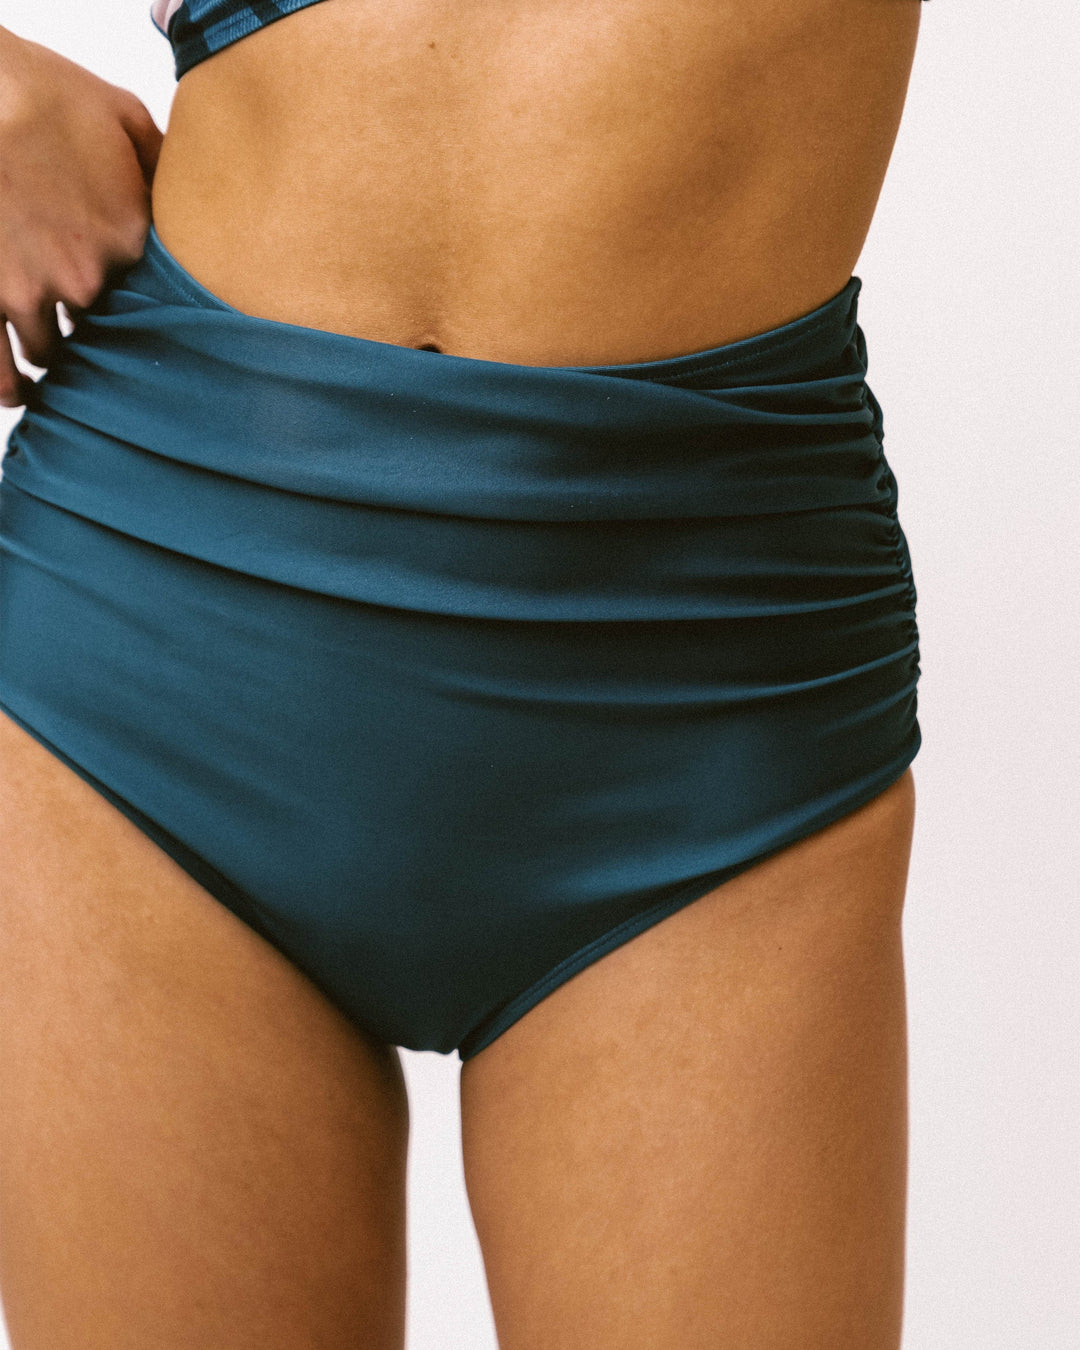 A close up photo of blue high waisted ruched swimsuit bottoms.